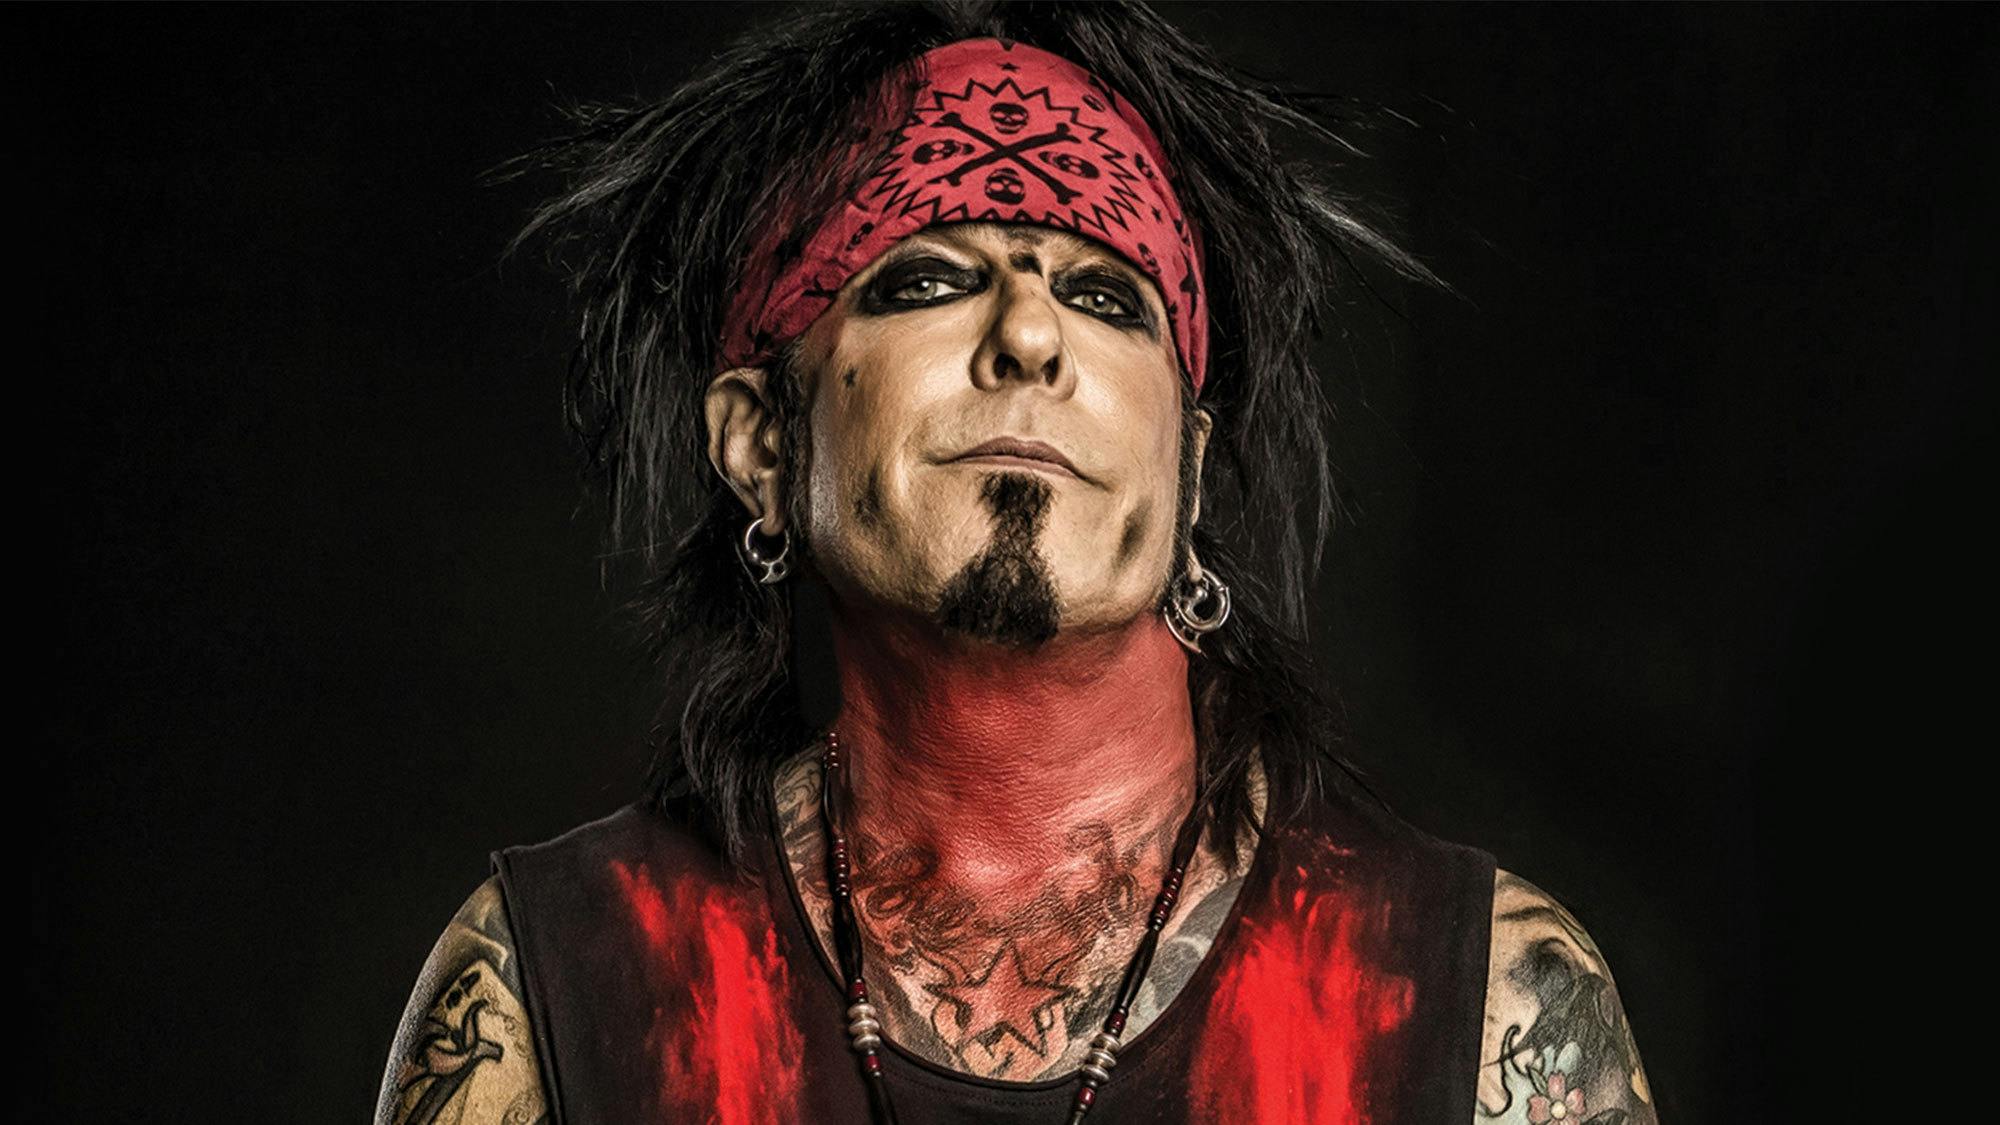 Nikki Sixx: "KISS Used Our Schtick. 